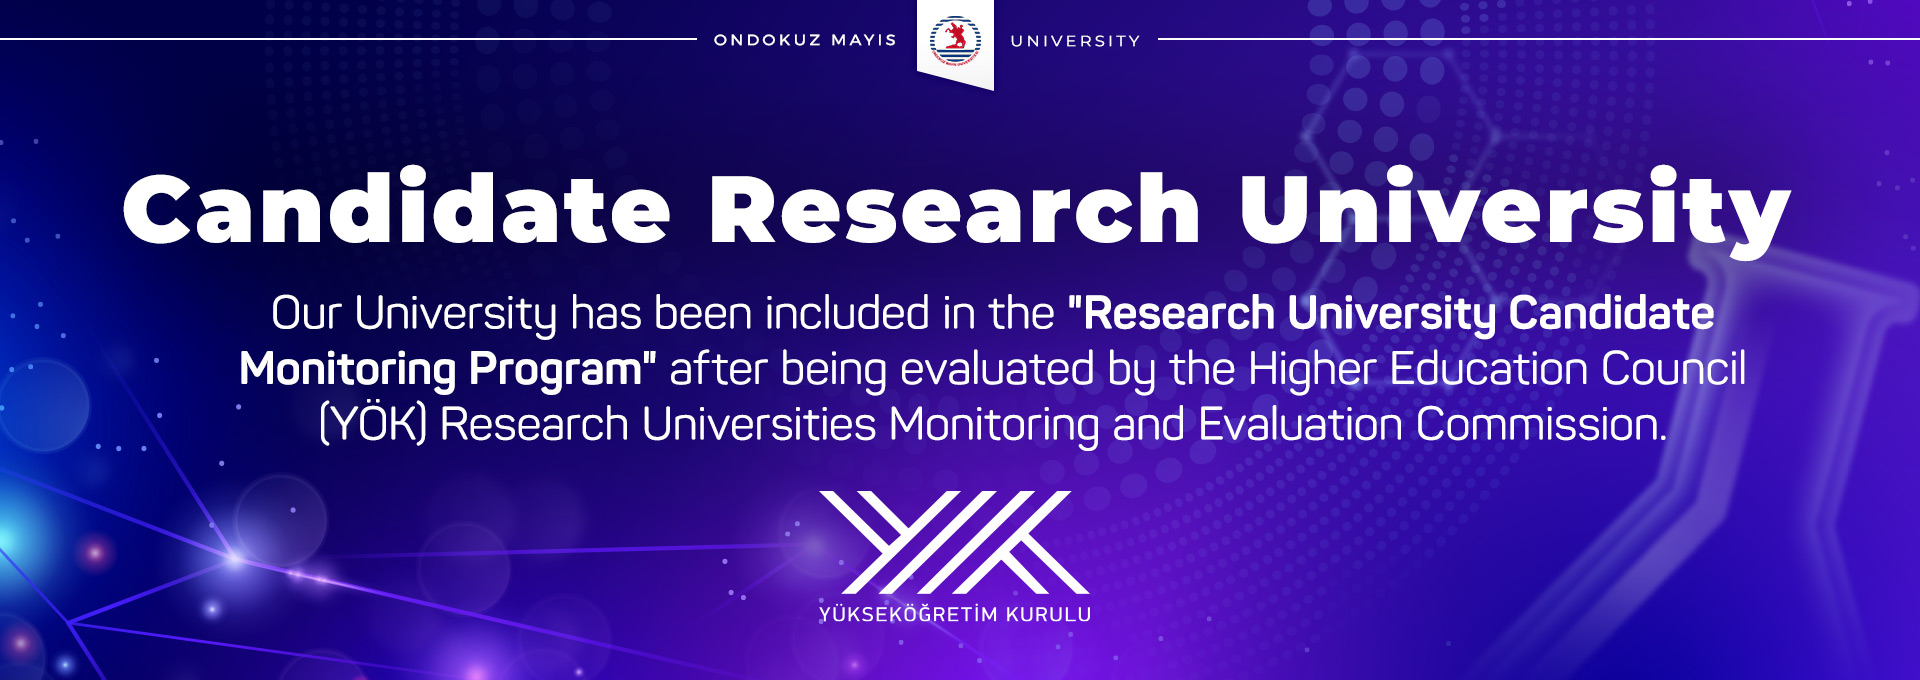 OMU in 'Research University Candidate Monitoring Program'